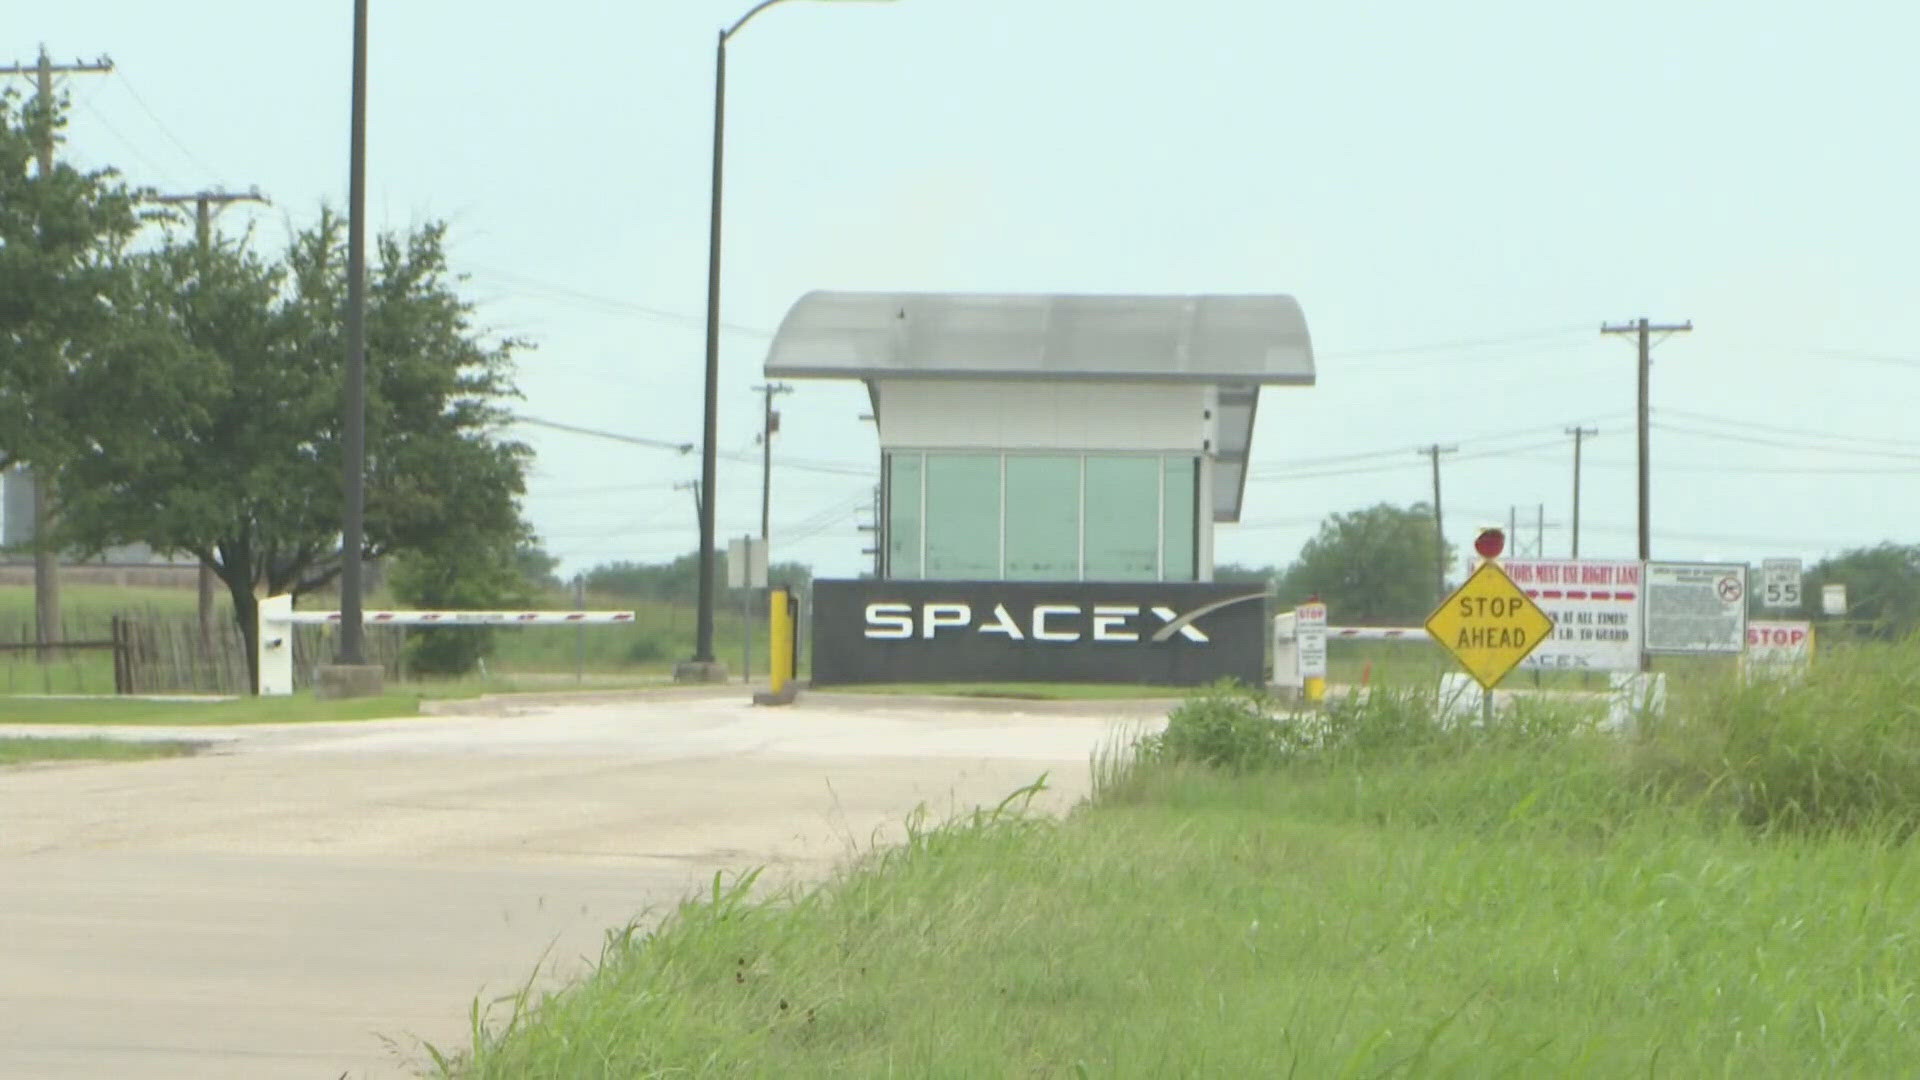 The lawsuit accuses SpaceX of gross negligence is asking for a monetary relief sum of over $250,000.